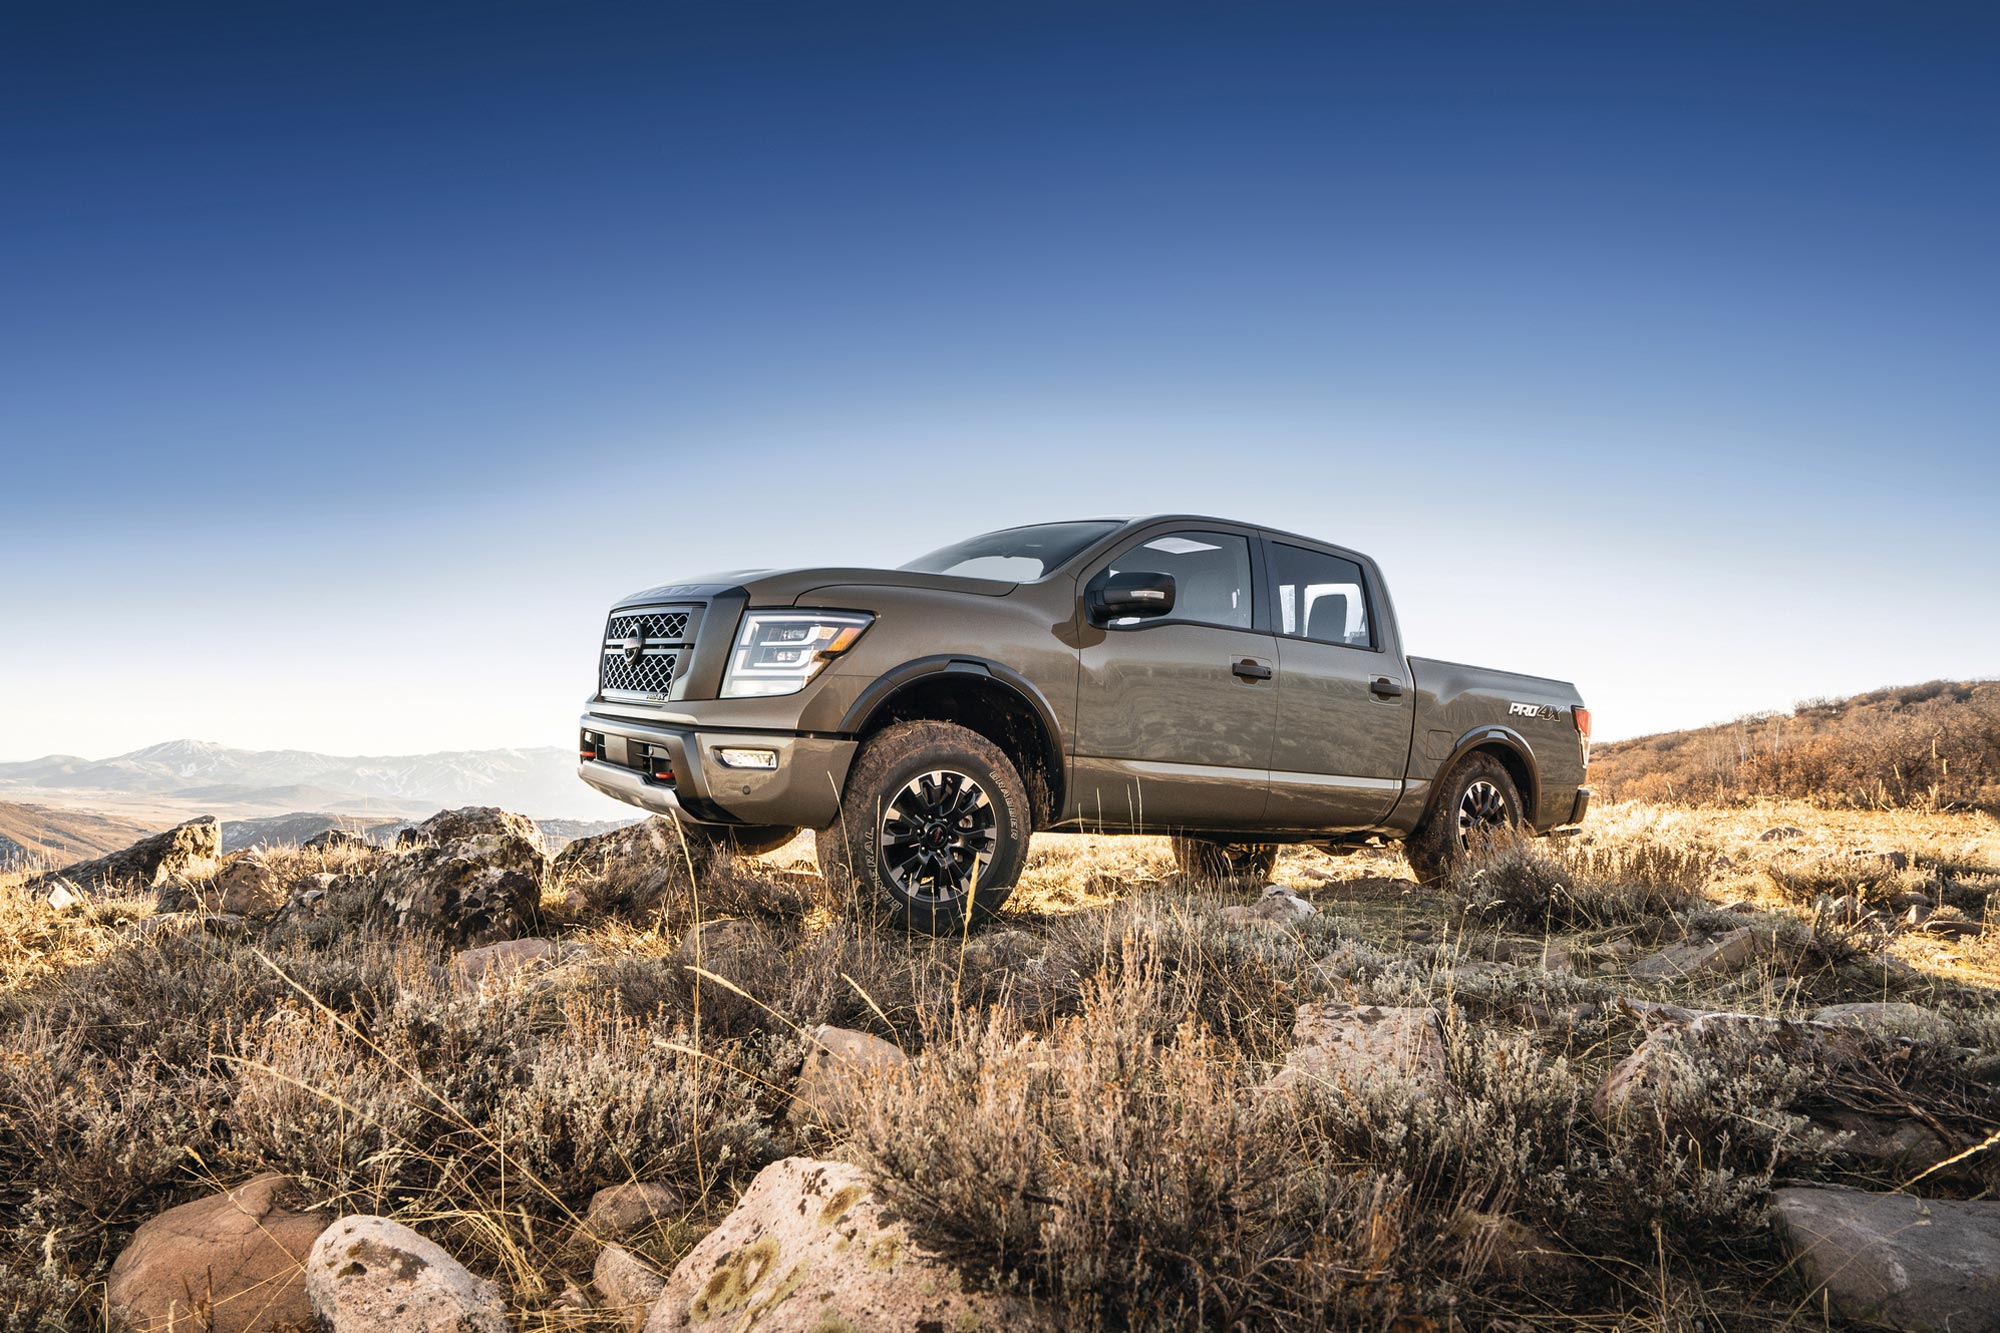 2023 Nissan Titan sits parked off road in a badlands landscape overlooking distant mountains.